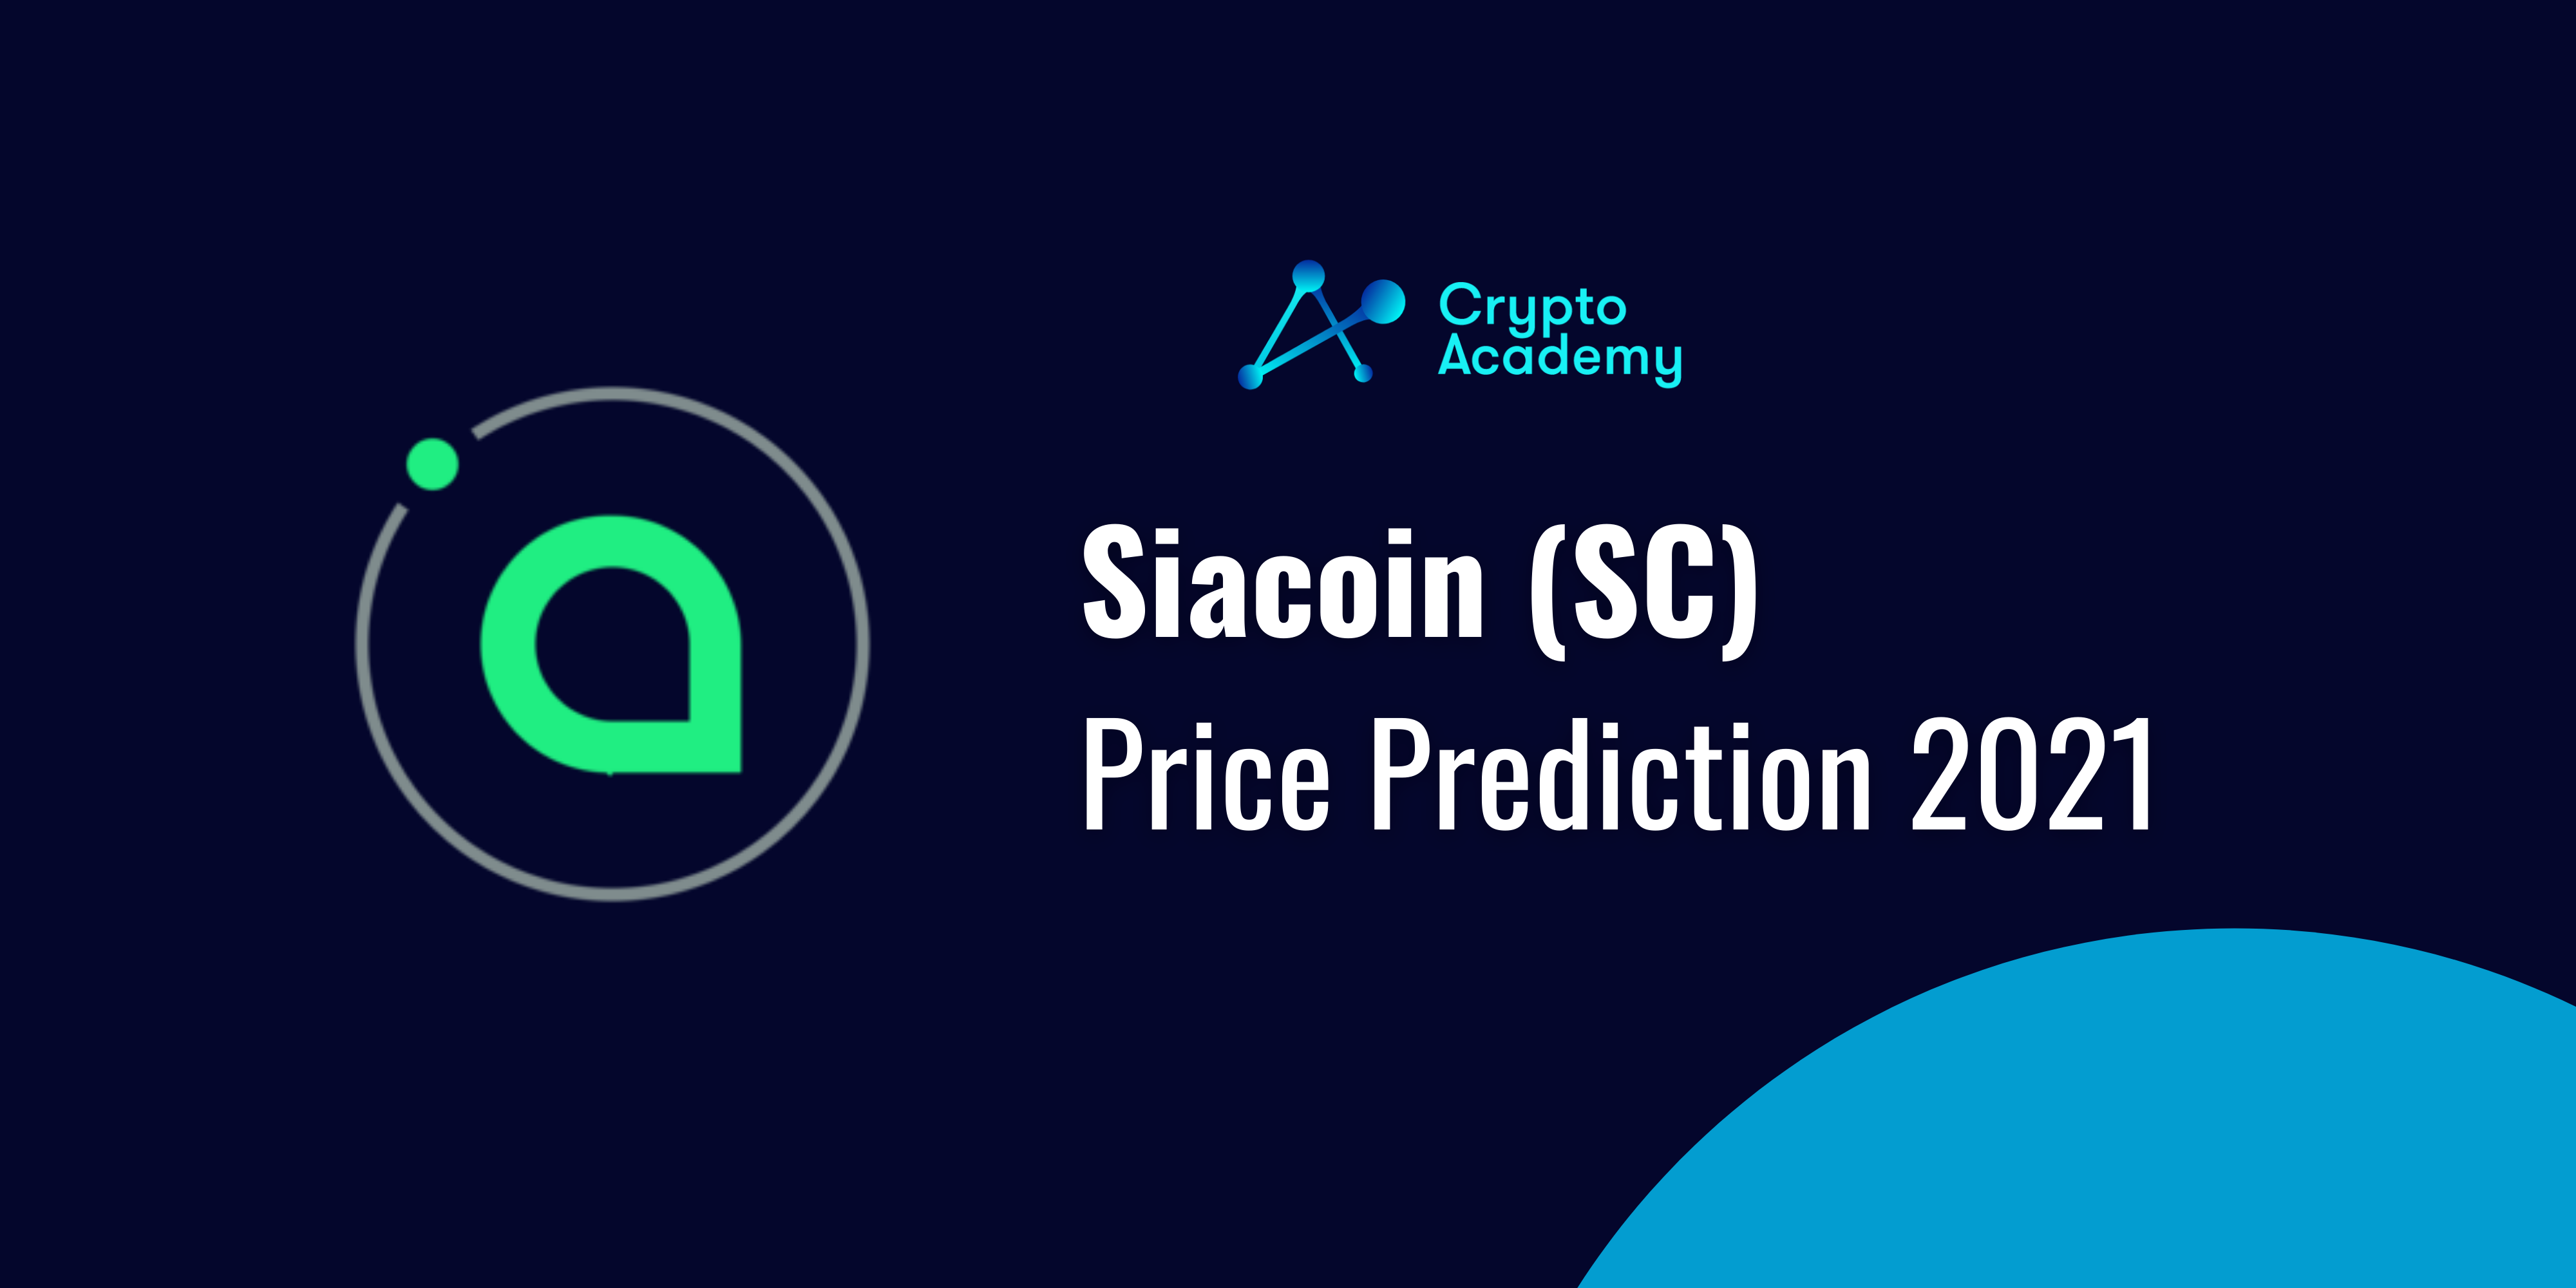 Siacoin (SC) Price Prediction 2021 and Beyond - Is SC a Good Investment?